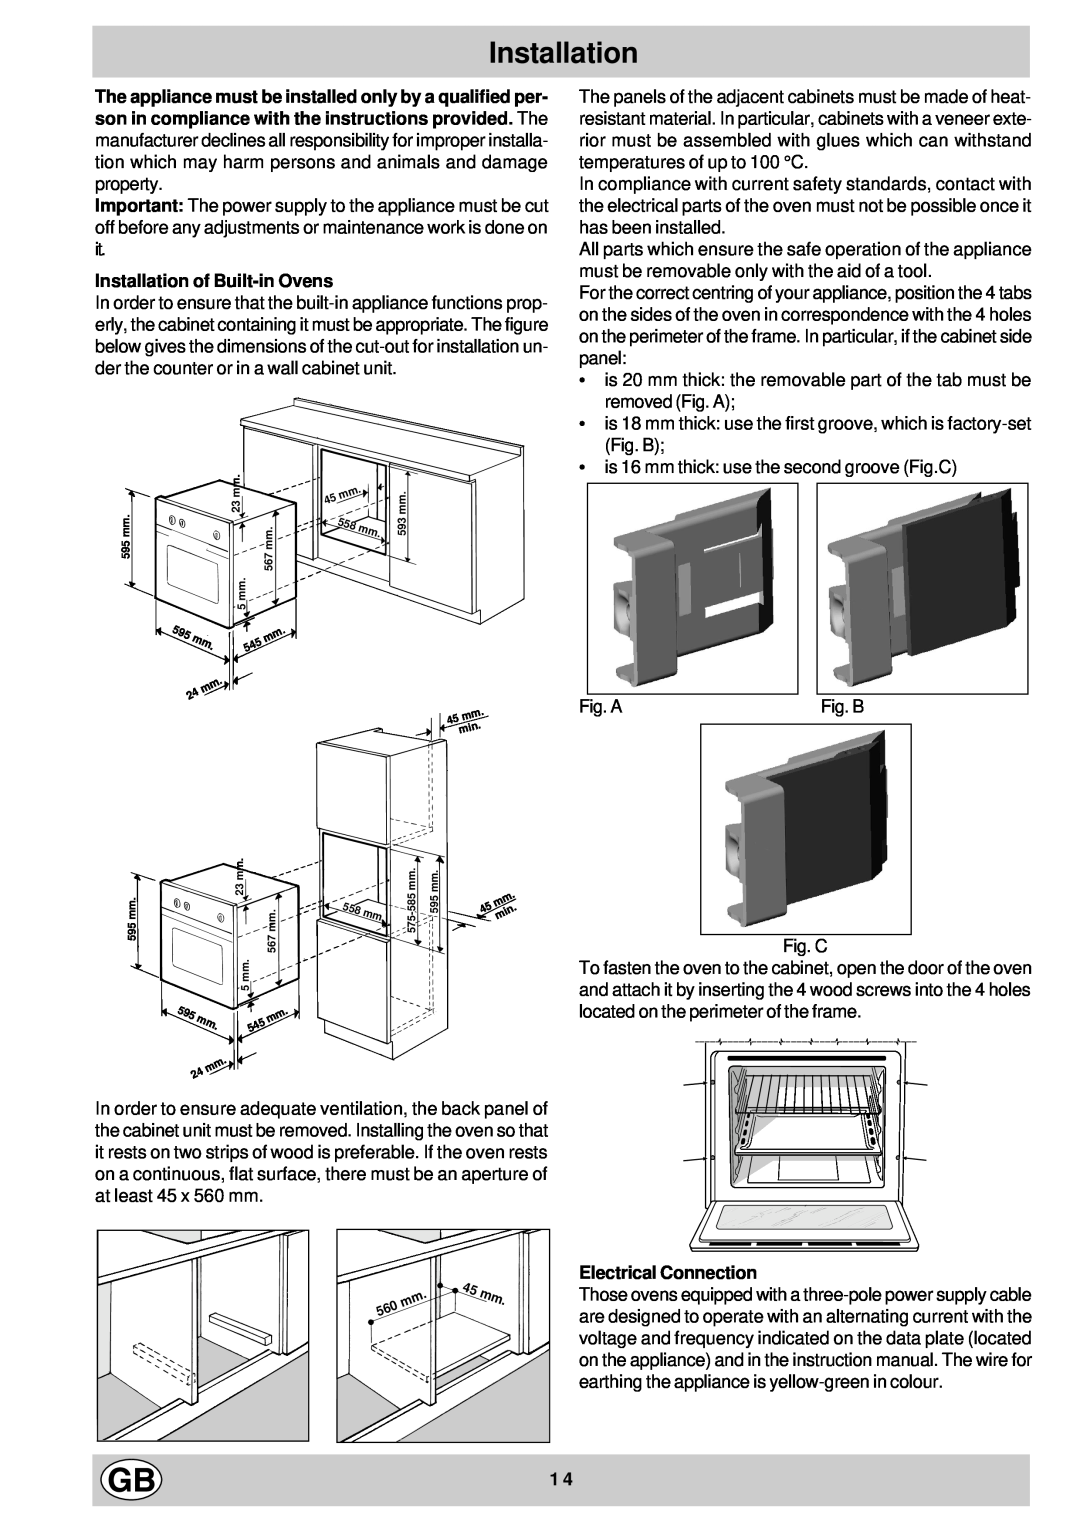 Hotpoint SD97 manual Installation of Built-inOvens, Electrical Connection 